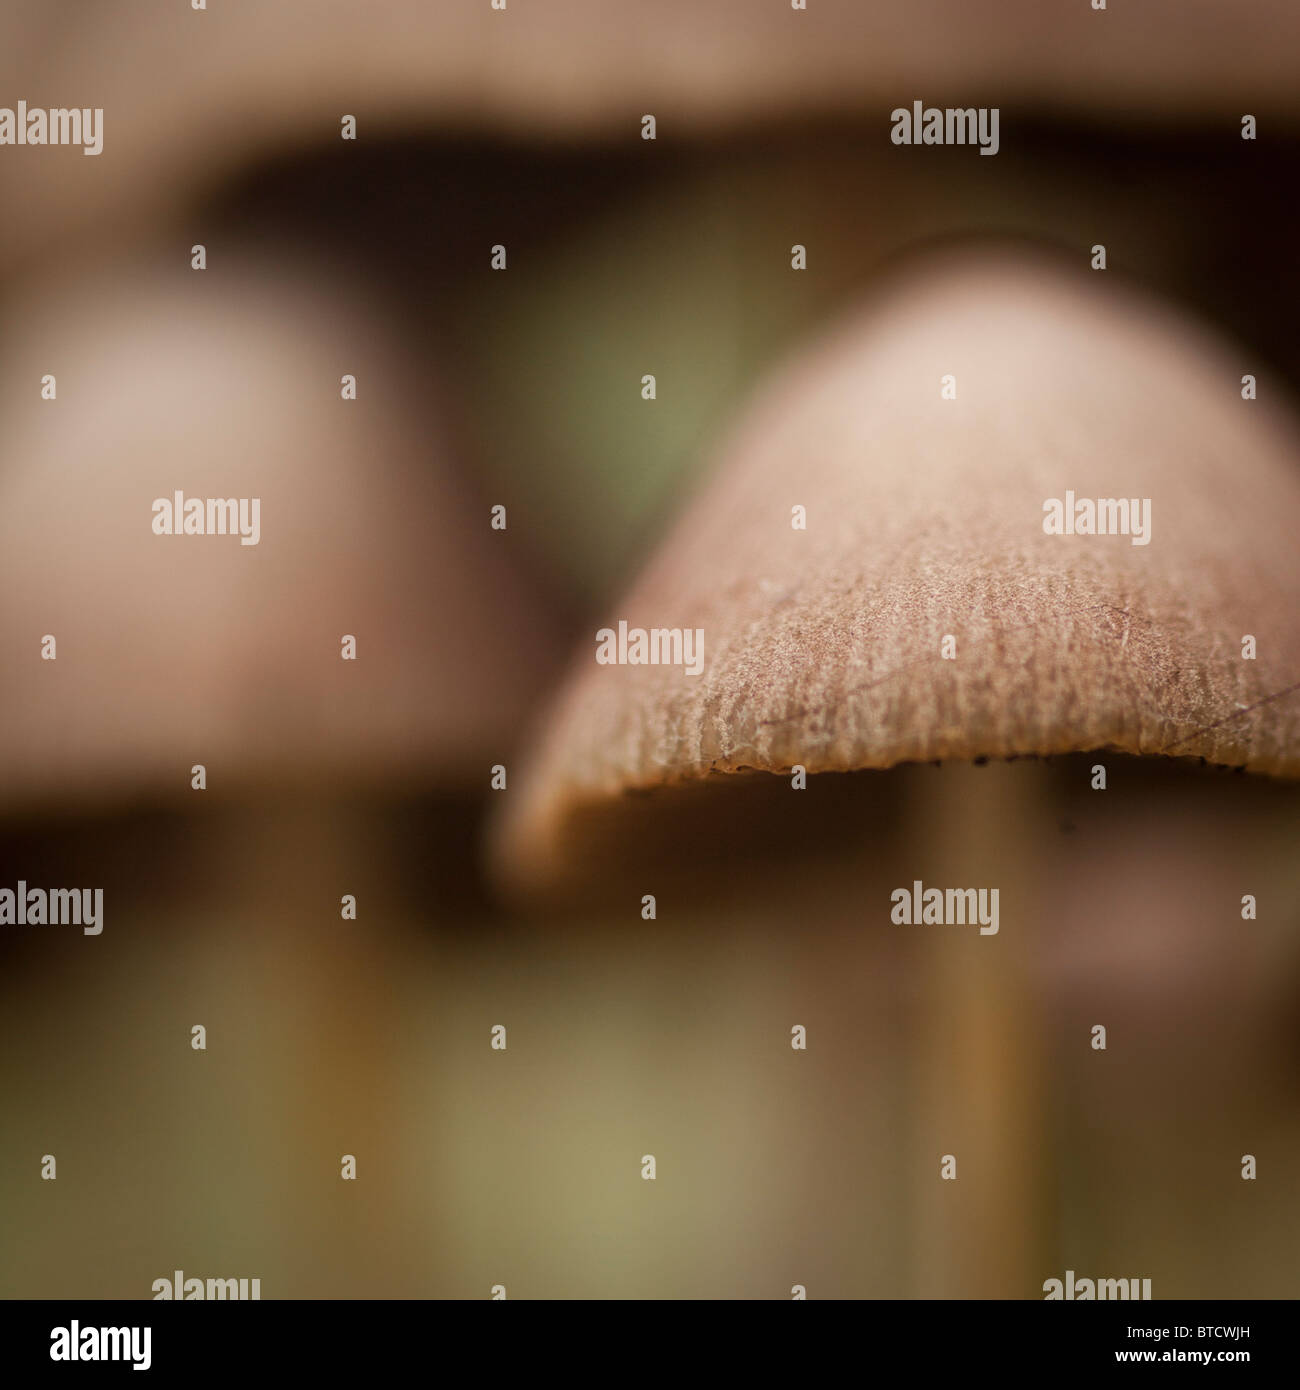 Creative image of brown caps of fungi taken with a shallow depth of field Stock Photo